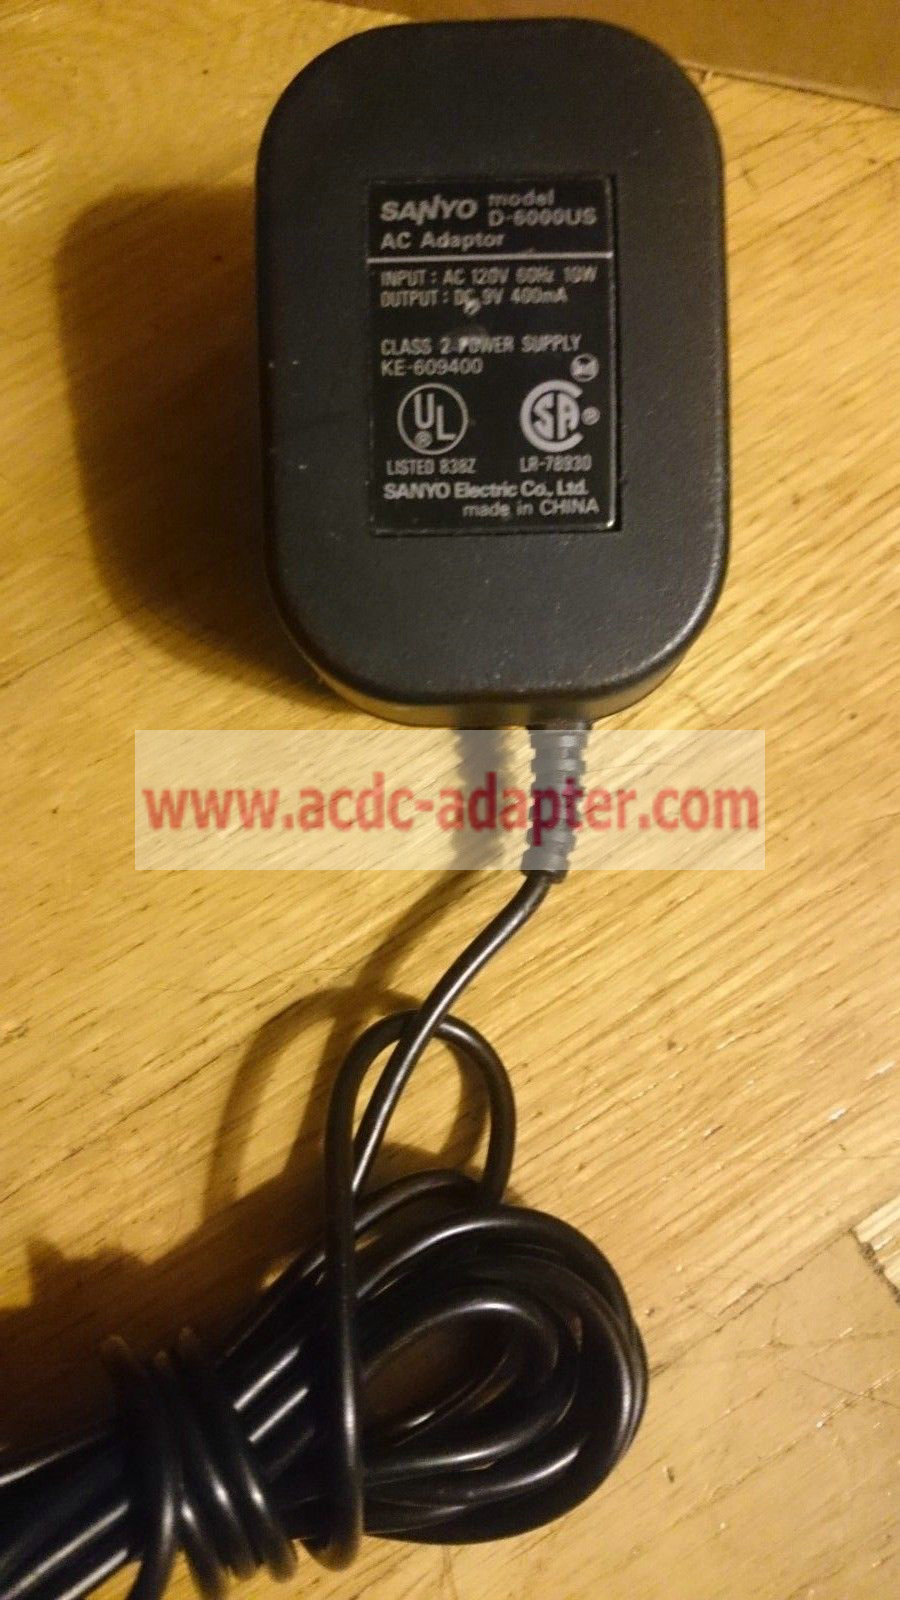 New SANYO D-6000US 9VDC 400mA AC Power Adapter For Sanyo Microcassette Transcriber - Click Image to Close